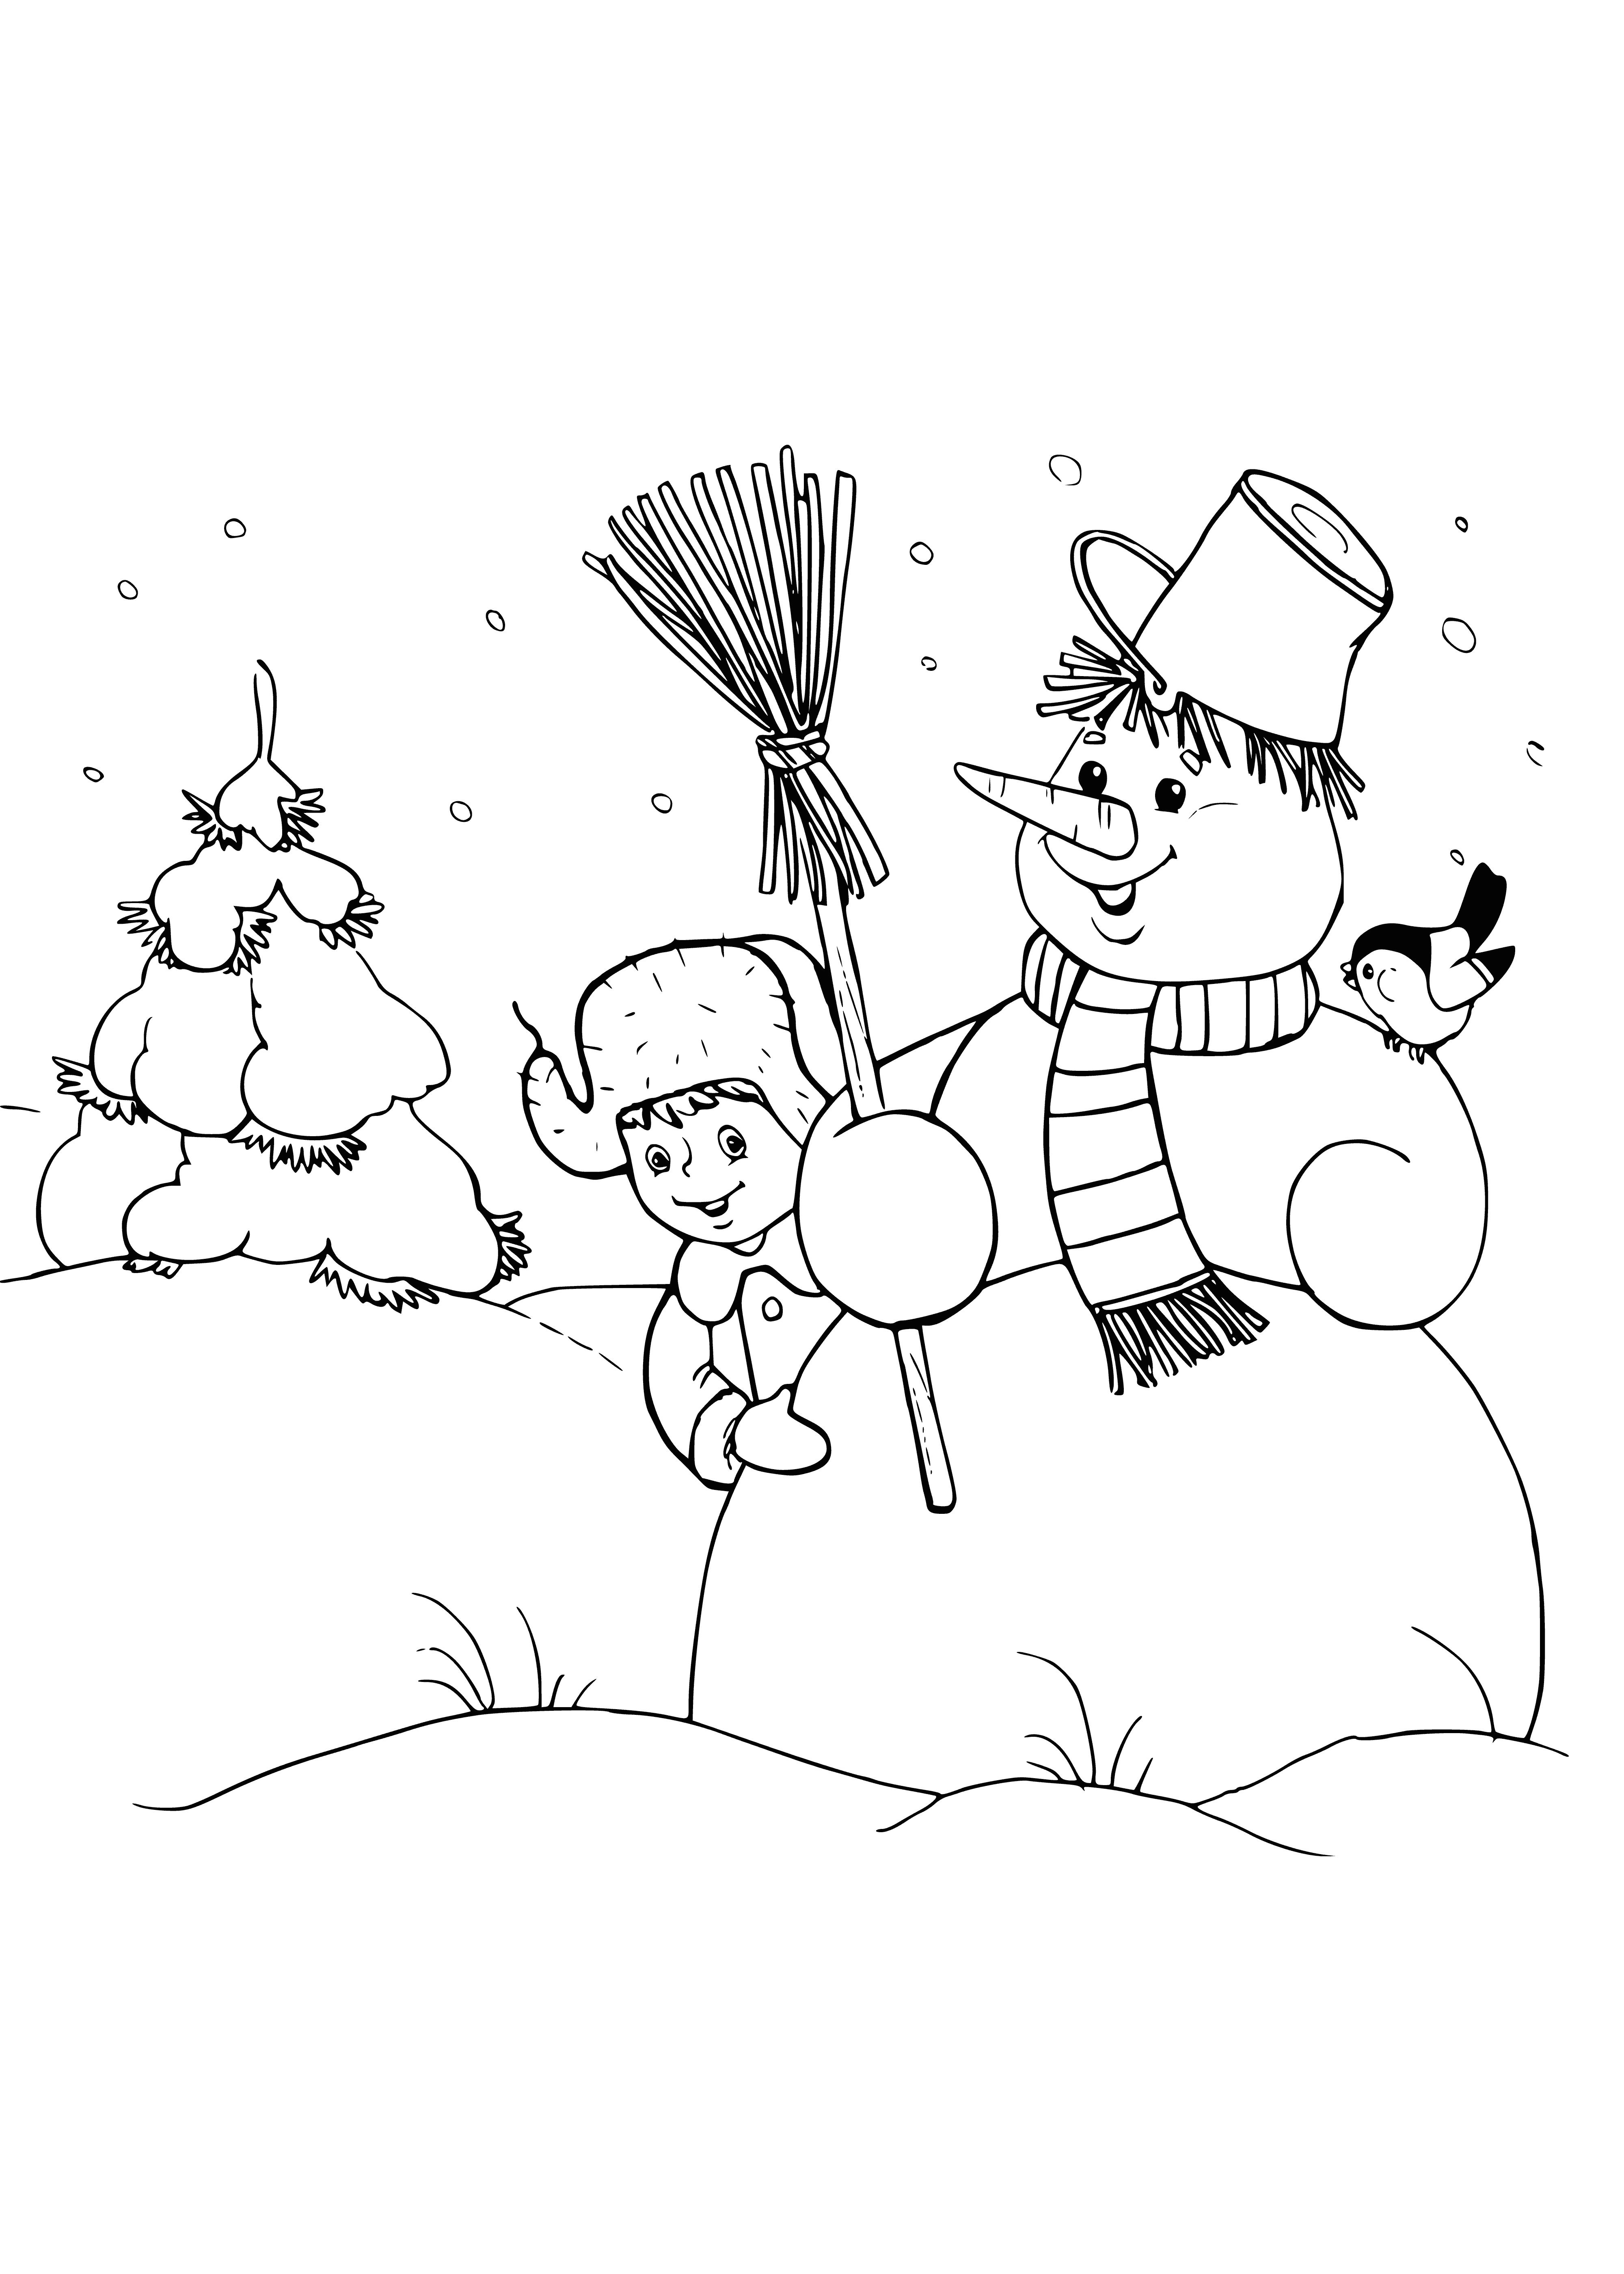 coloring page: Snowman in winter forest has carrot nose, coal eyes, red scarf, & black top hat.